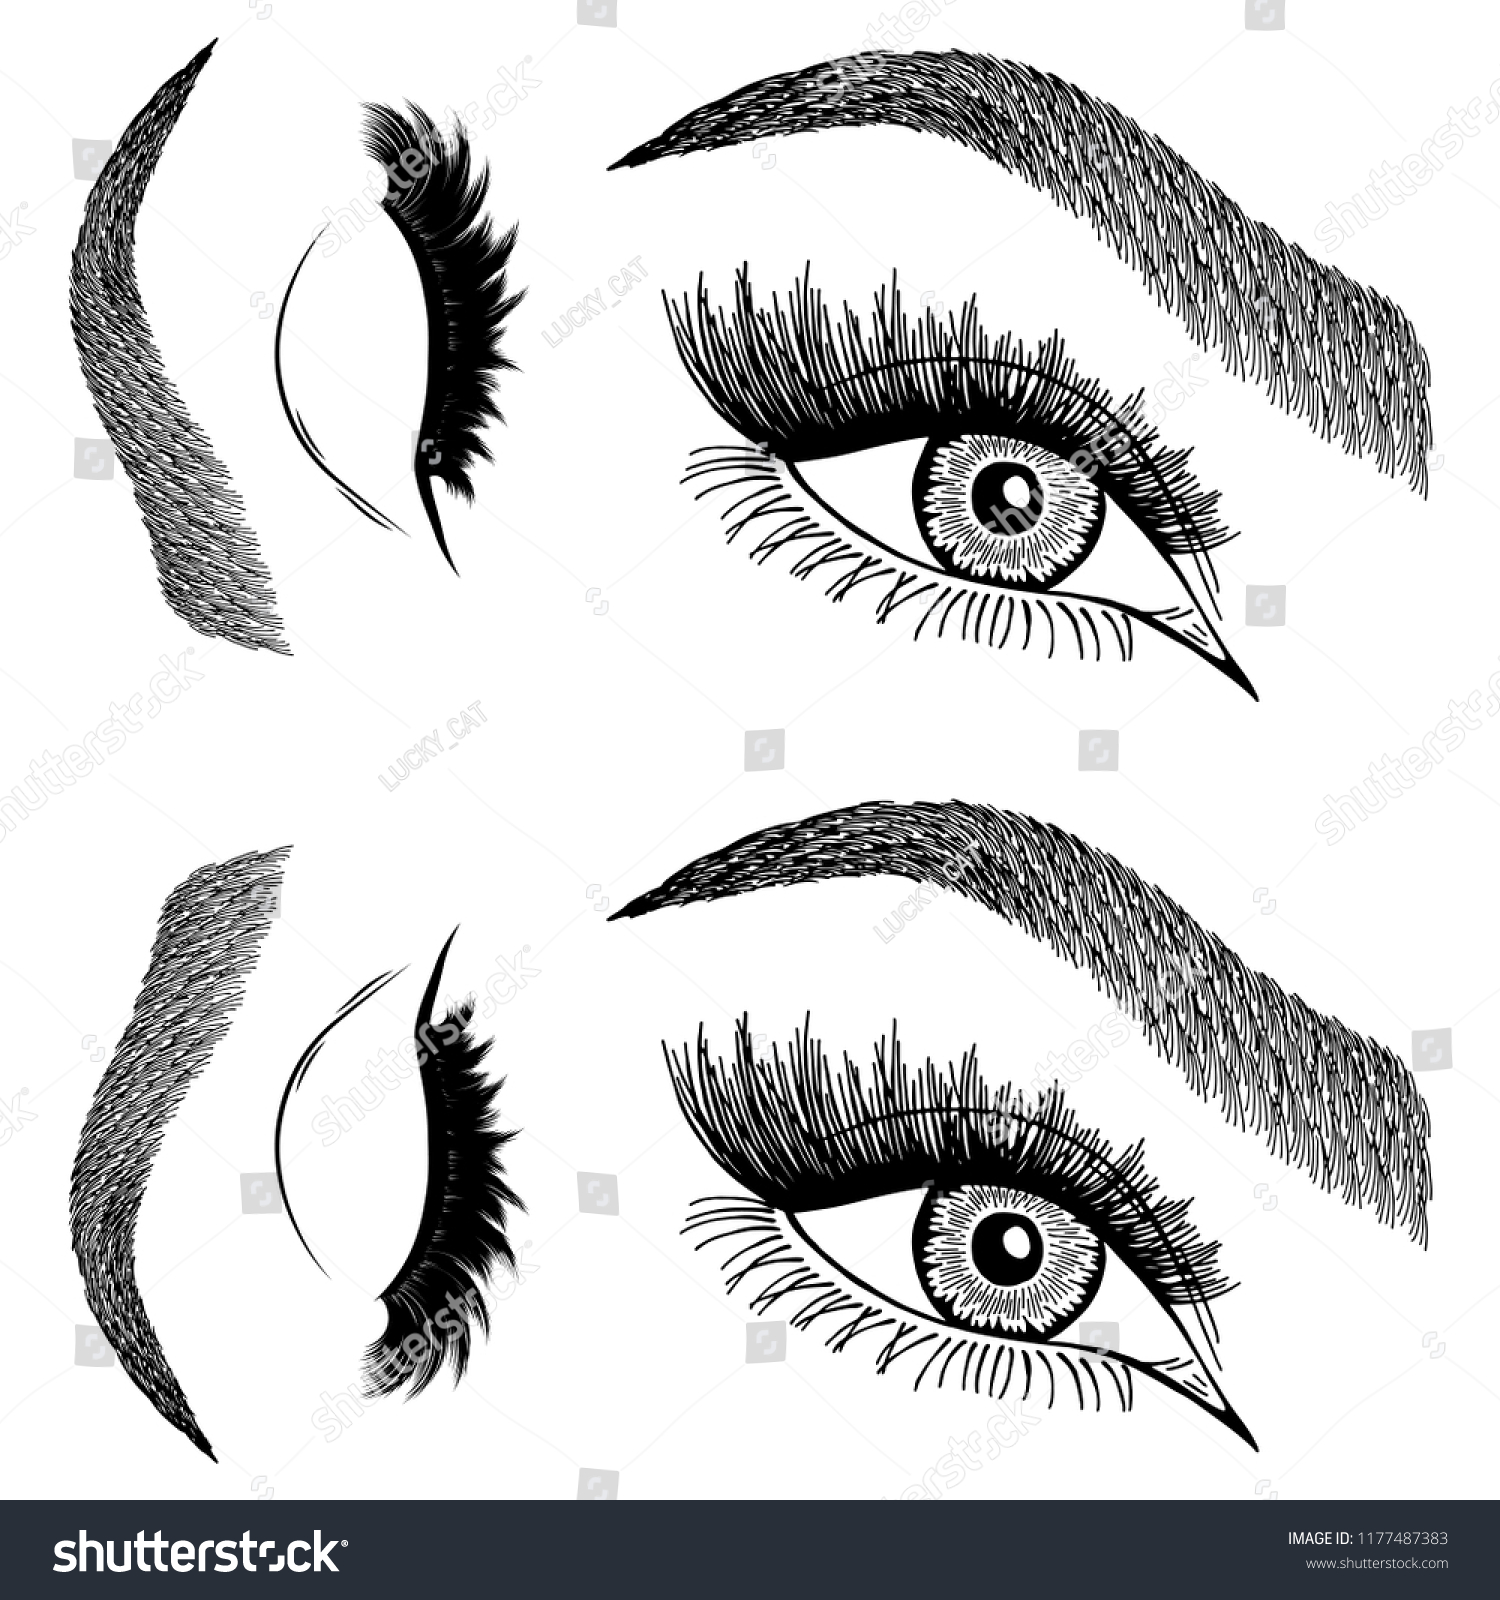 Illustration With Womans Eyes Eyelashes And Royalty Free Stock Vector 1177487383 1939